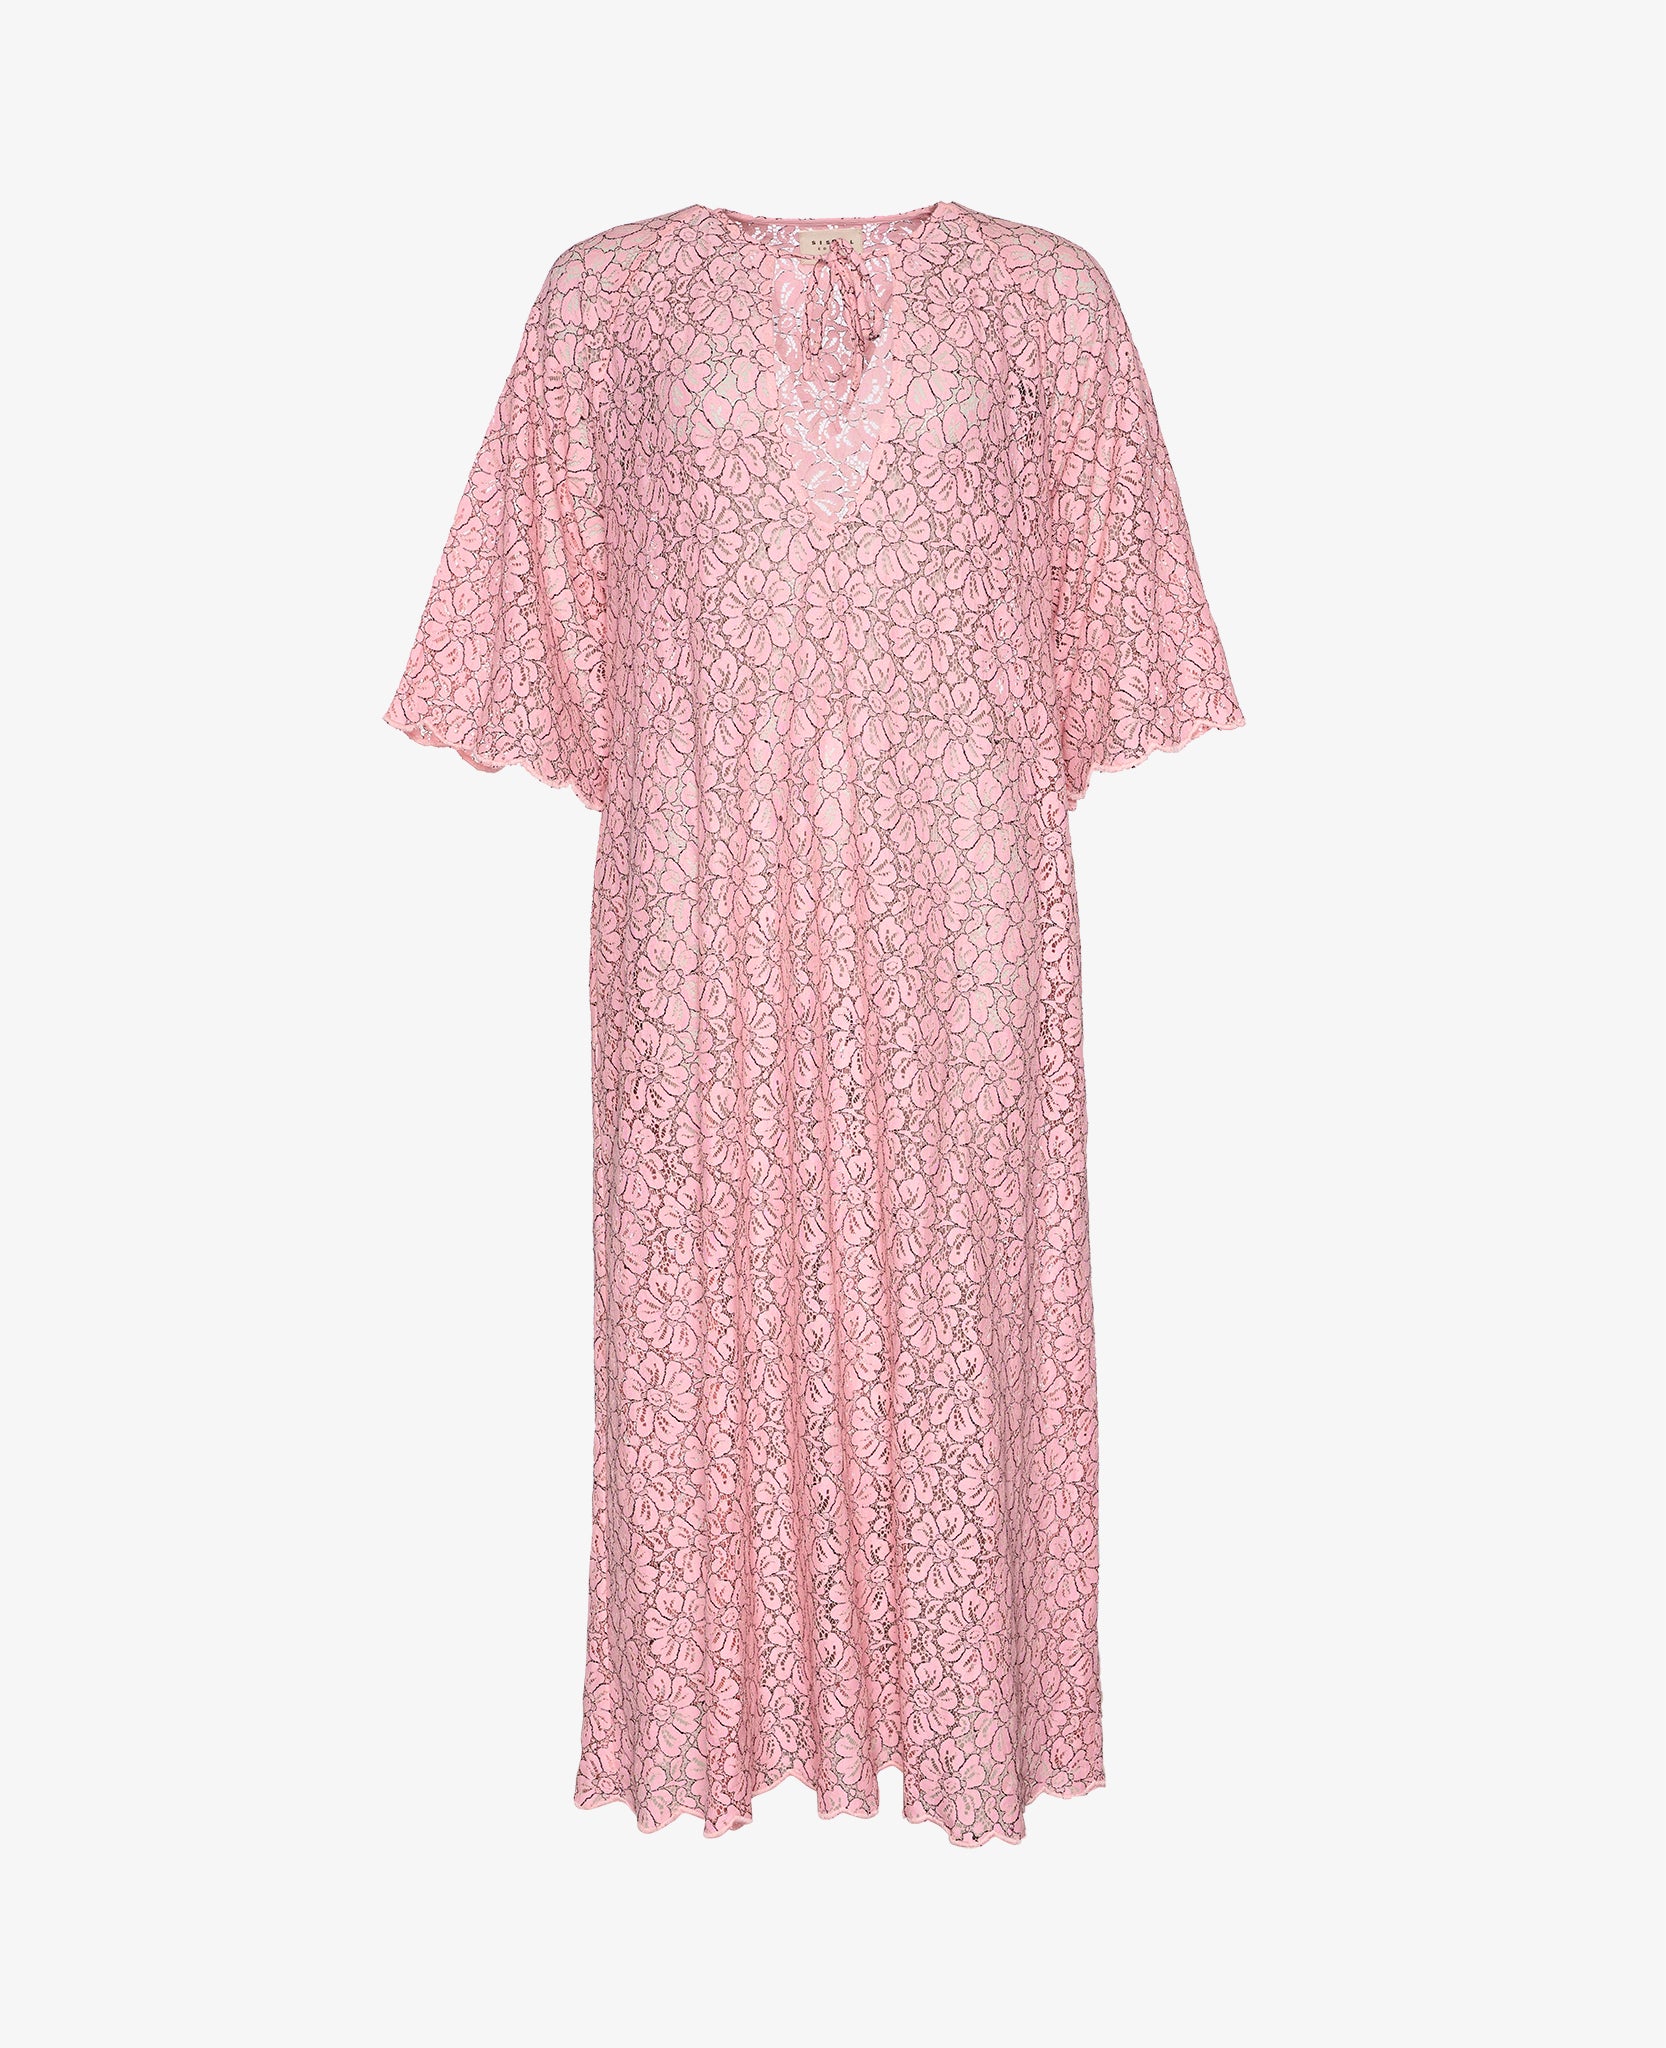 Lace Leftover Dress, Pink One-Size